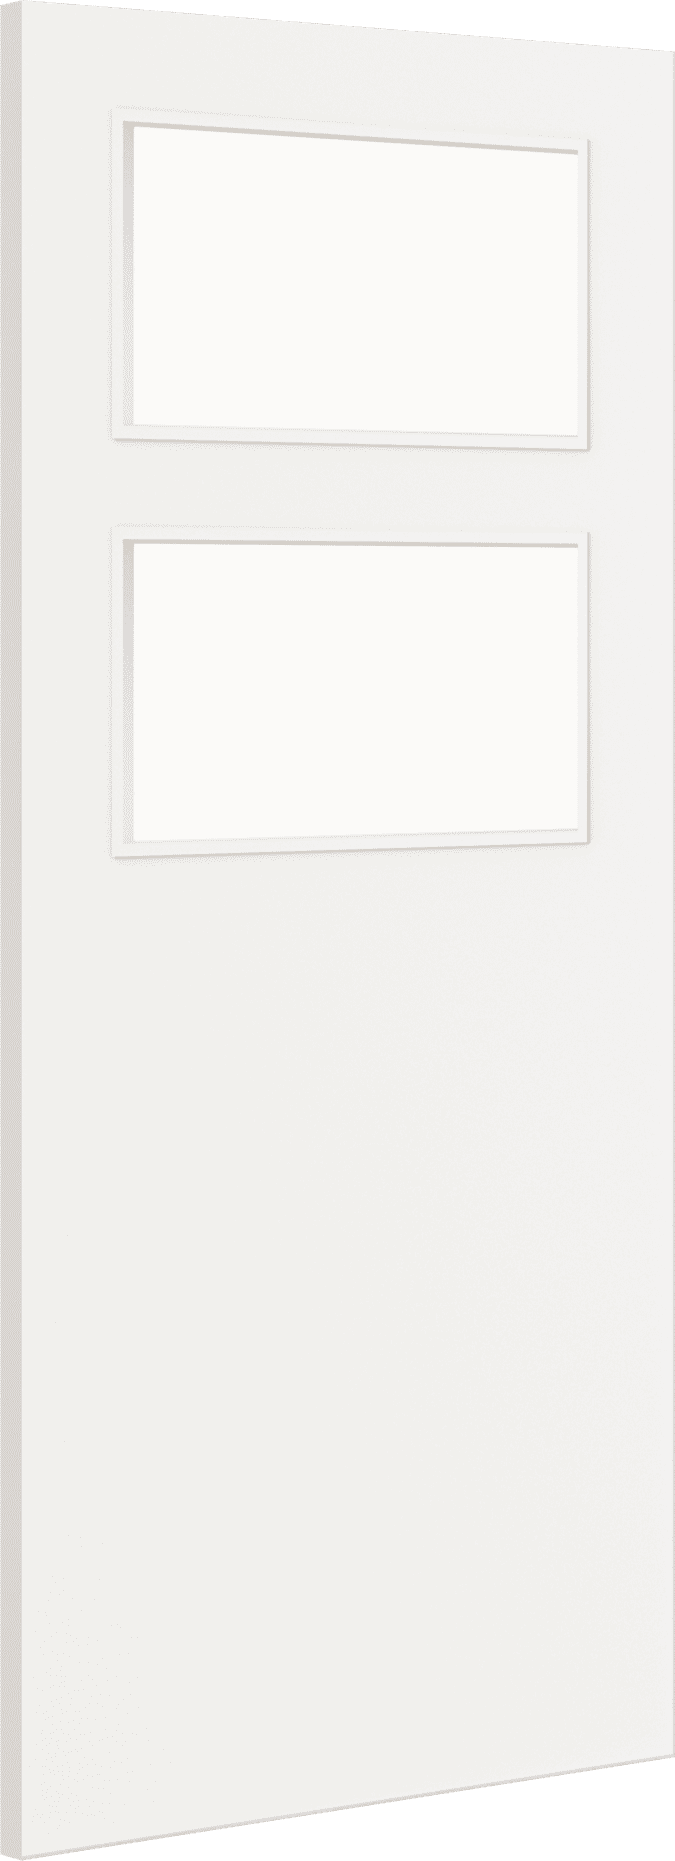 1981mm x 914mm x 44mm (36") Architectural Paint Grade White 02 Frosted Glazed Fire Door Blank